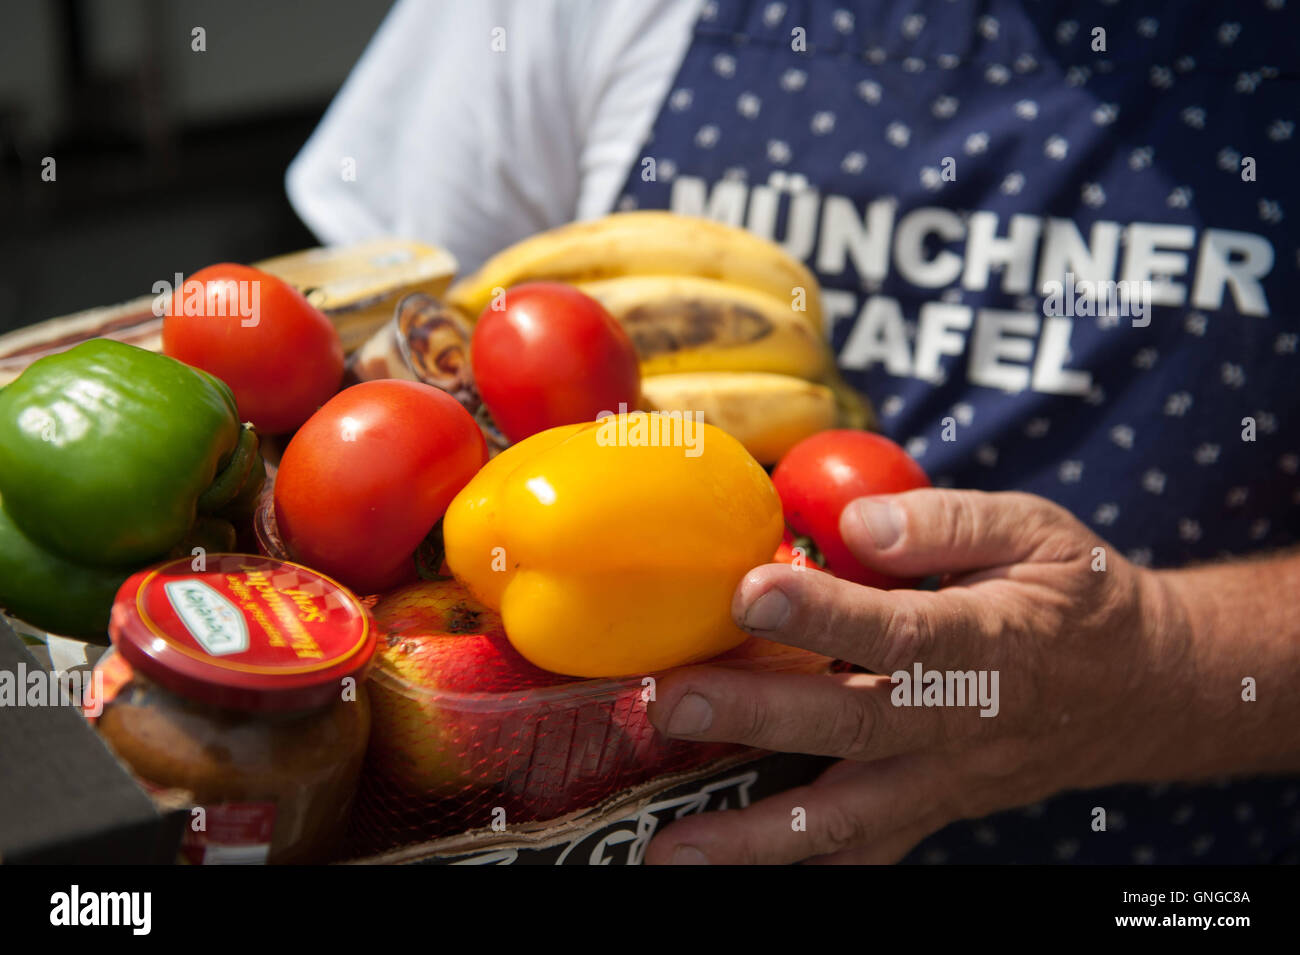 Counter of the Muenchner Tafel, 2014 Stock Photo